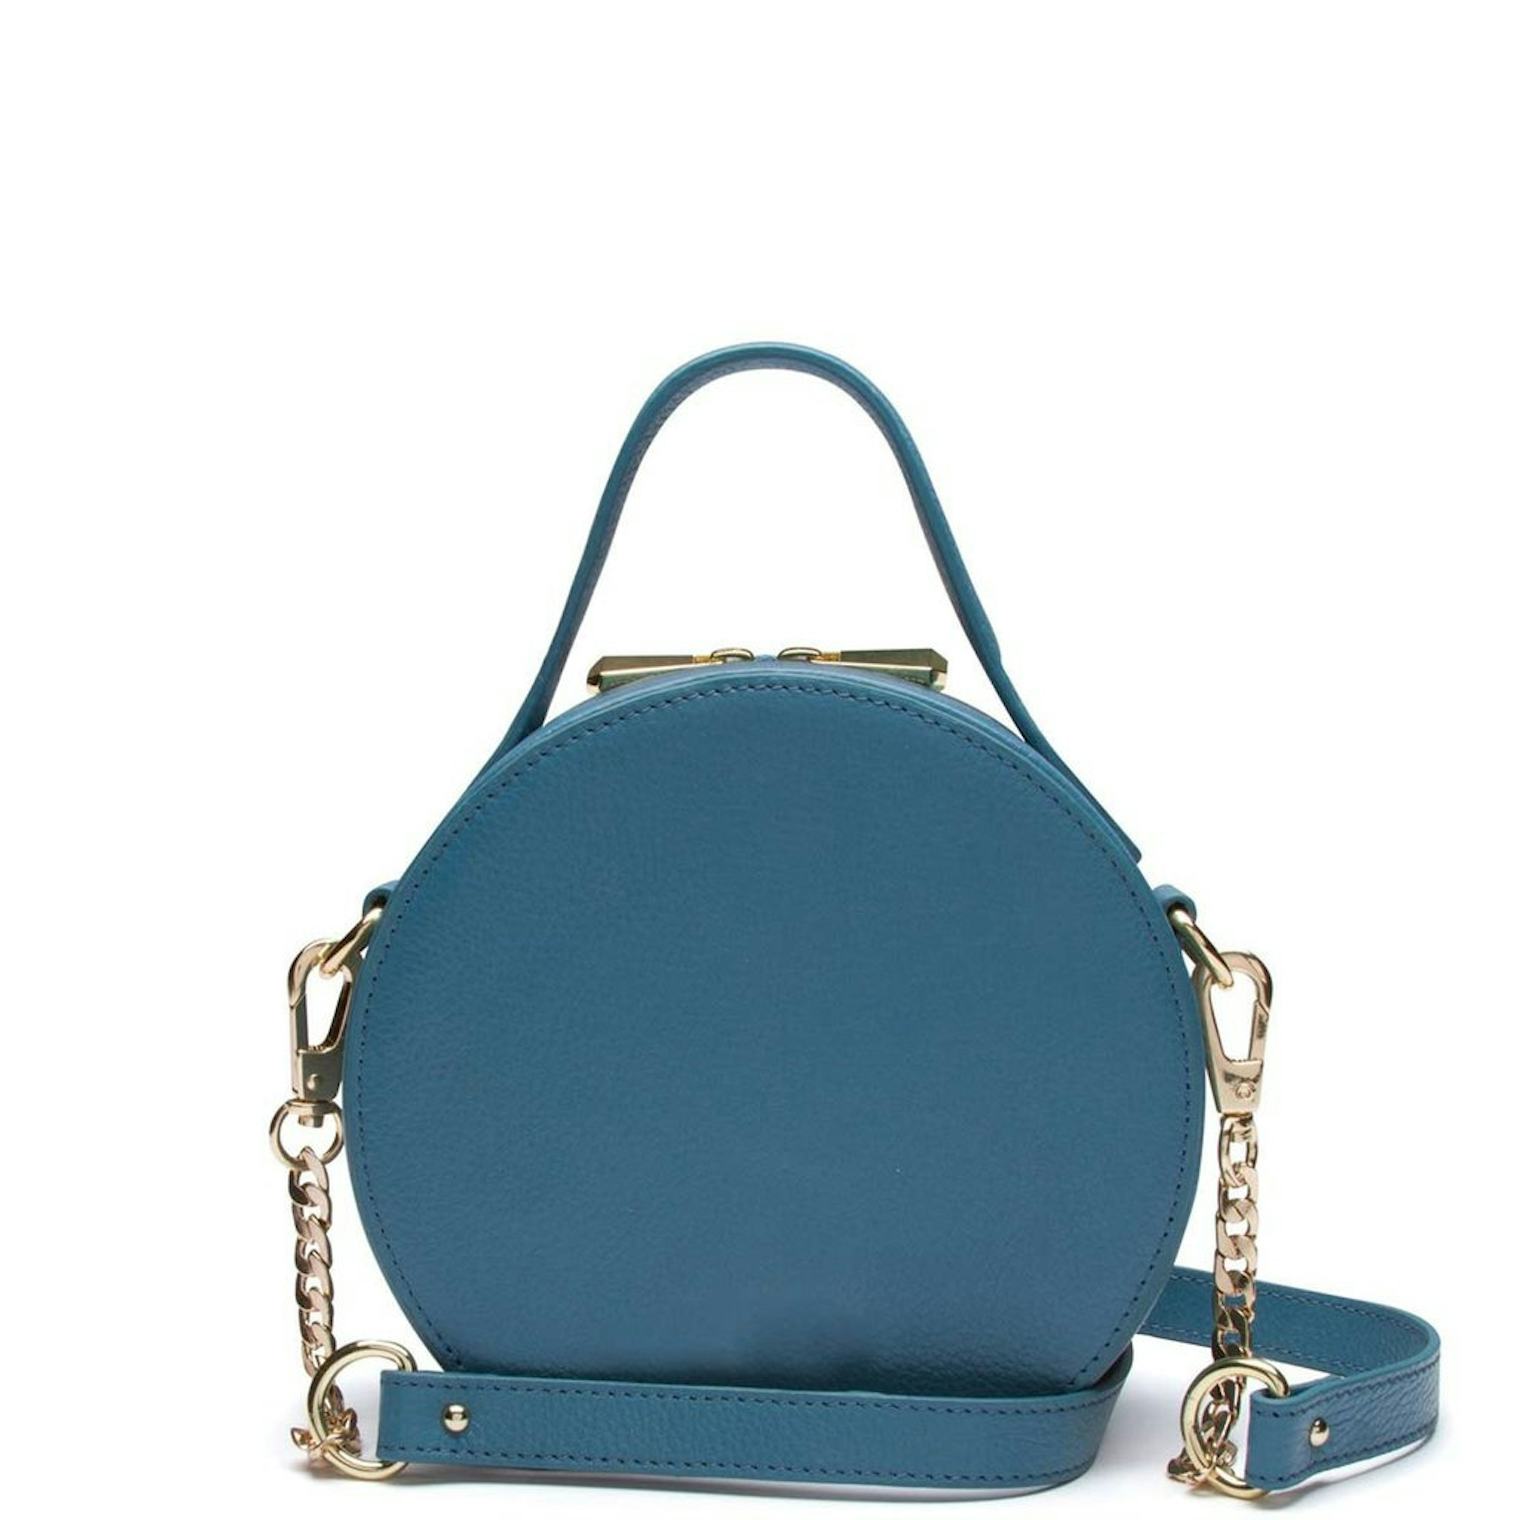 14 Circle Bags To Make You Go Round And Round This Spring